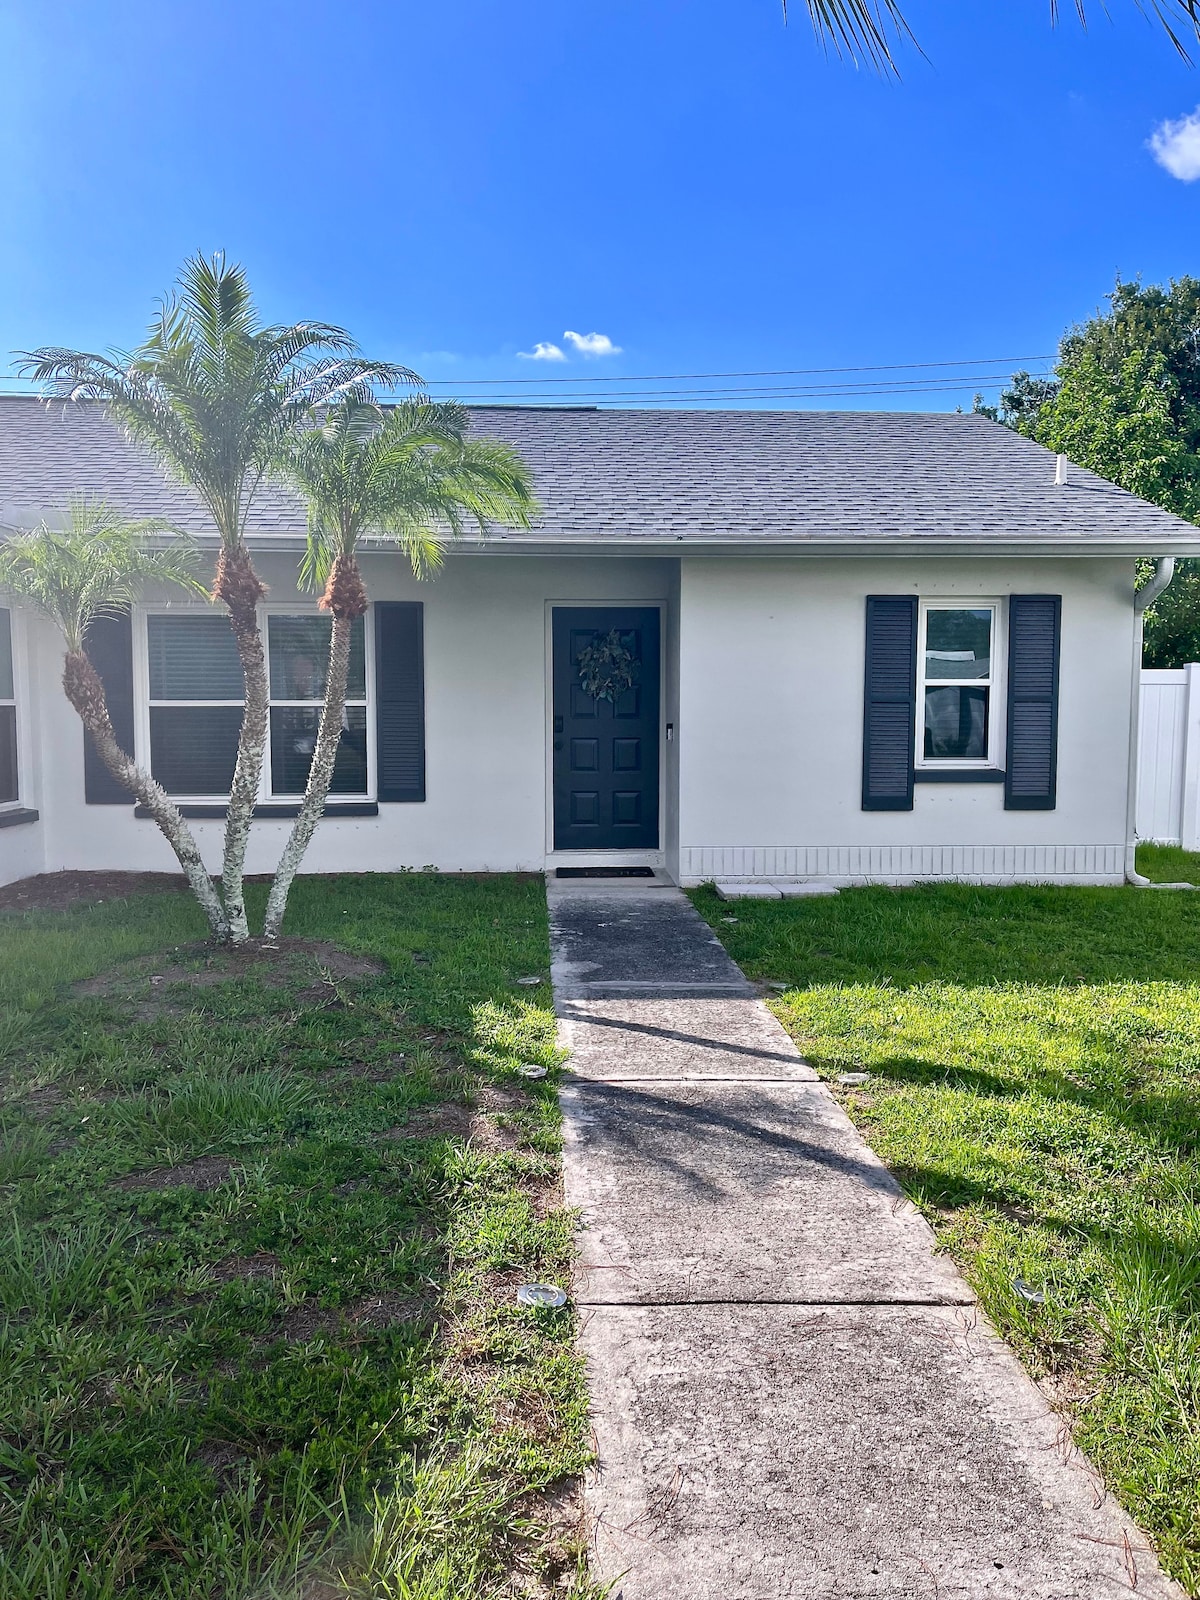 3BD/2BA Tampa Home - Great Location!